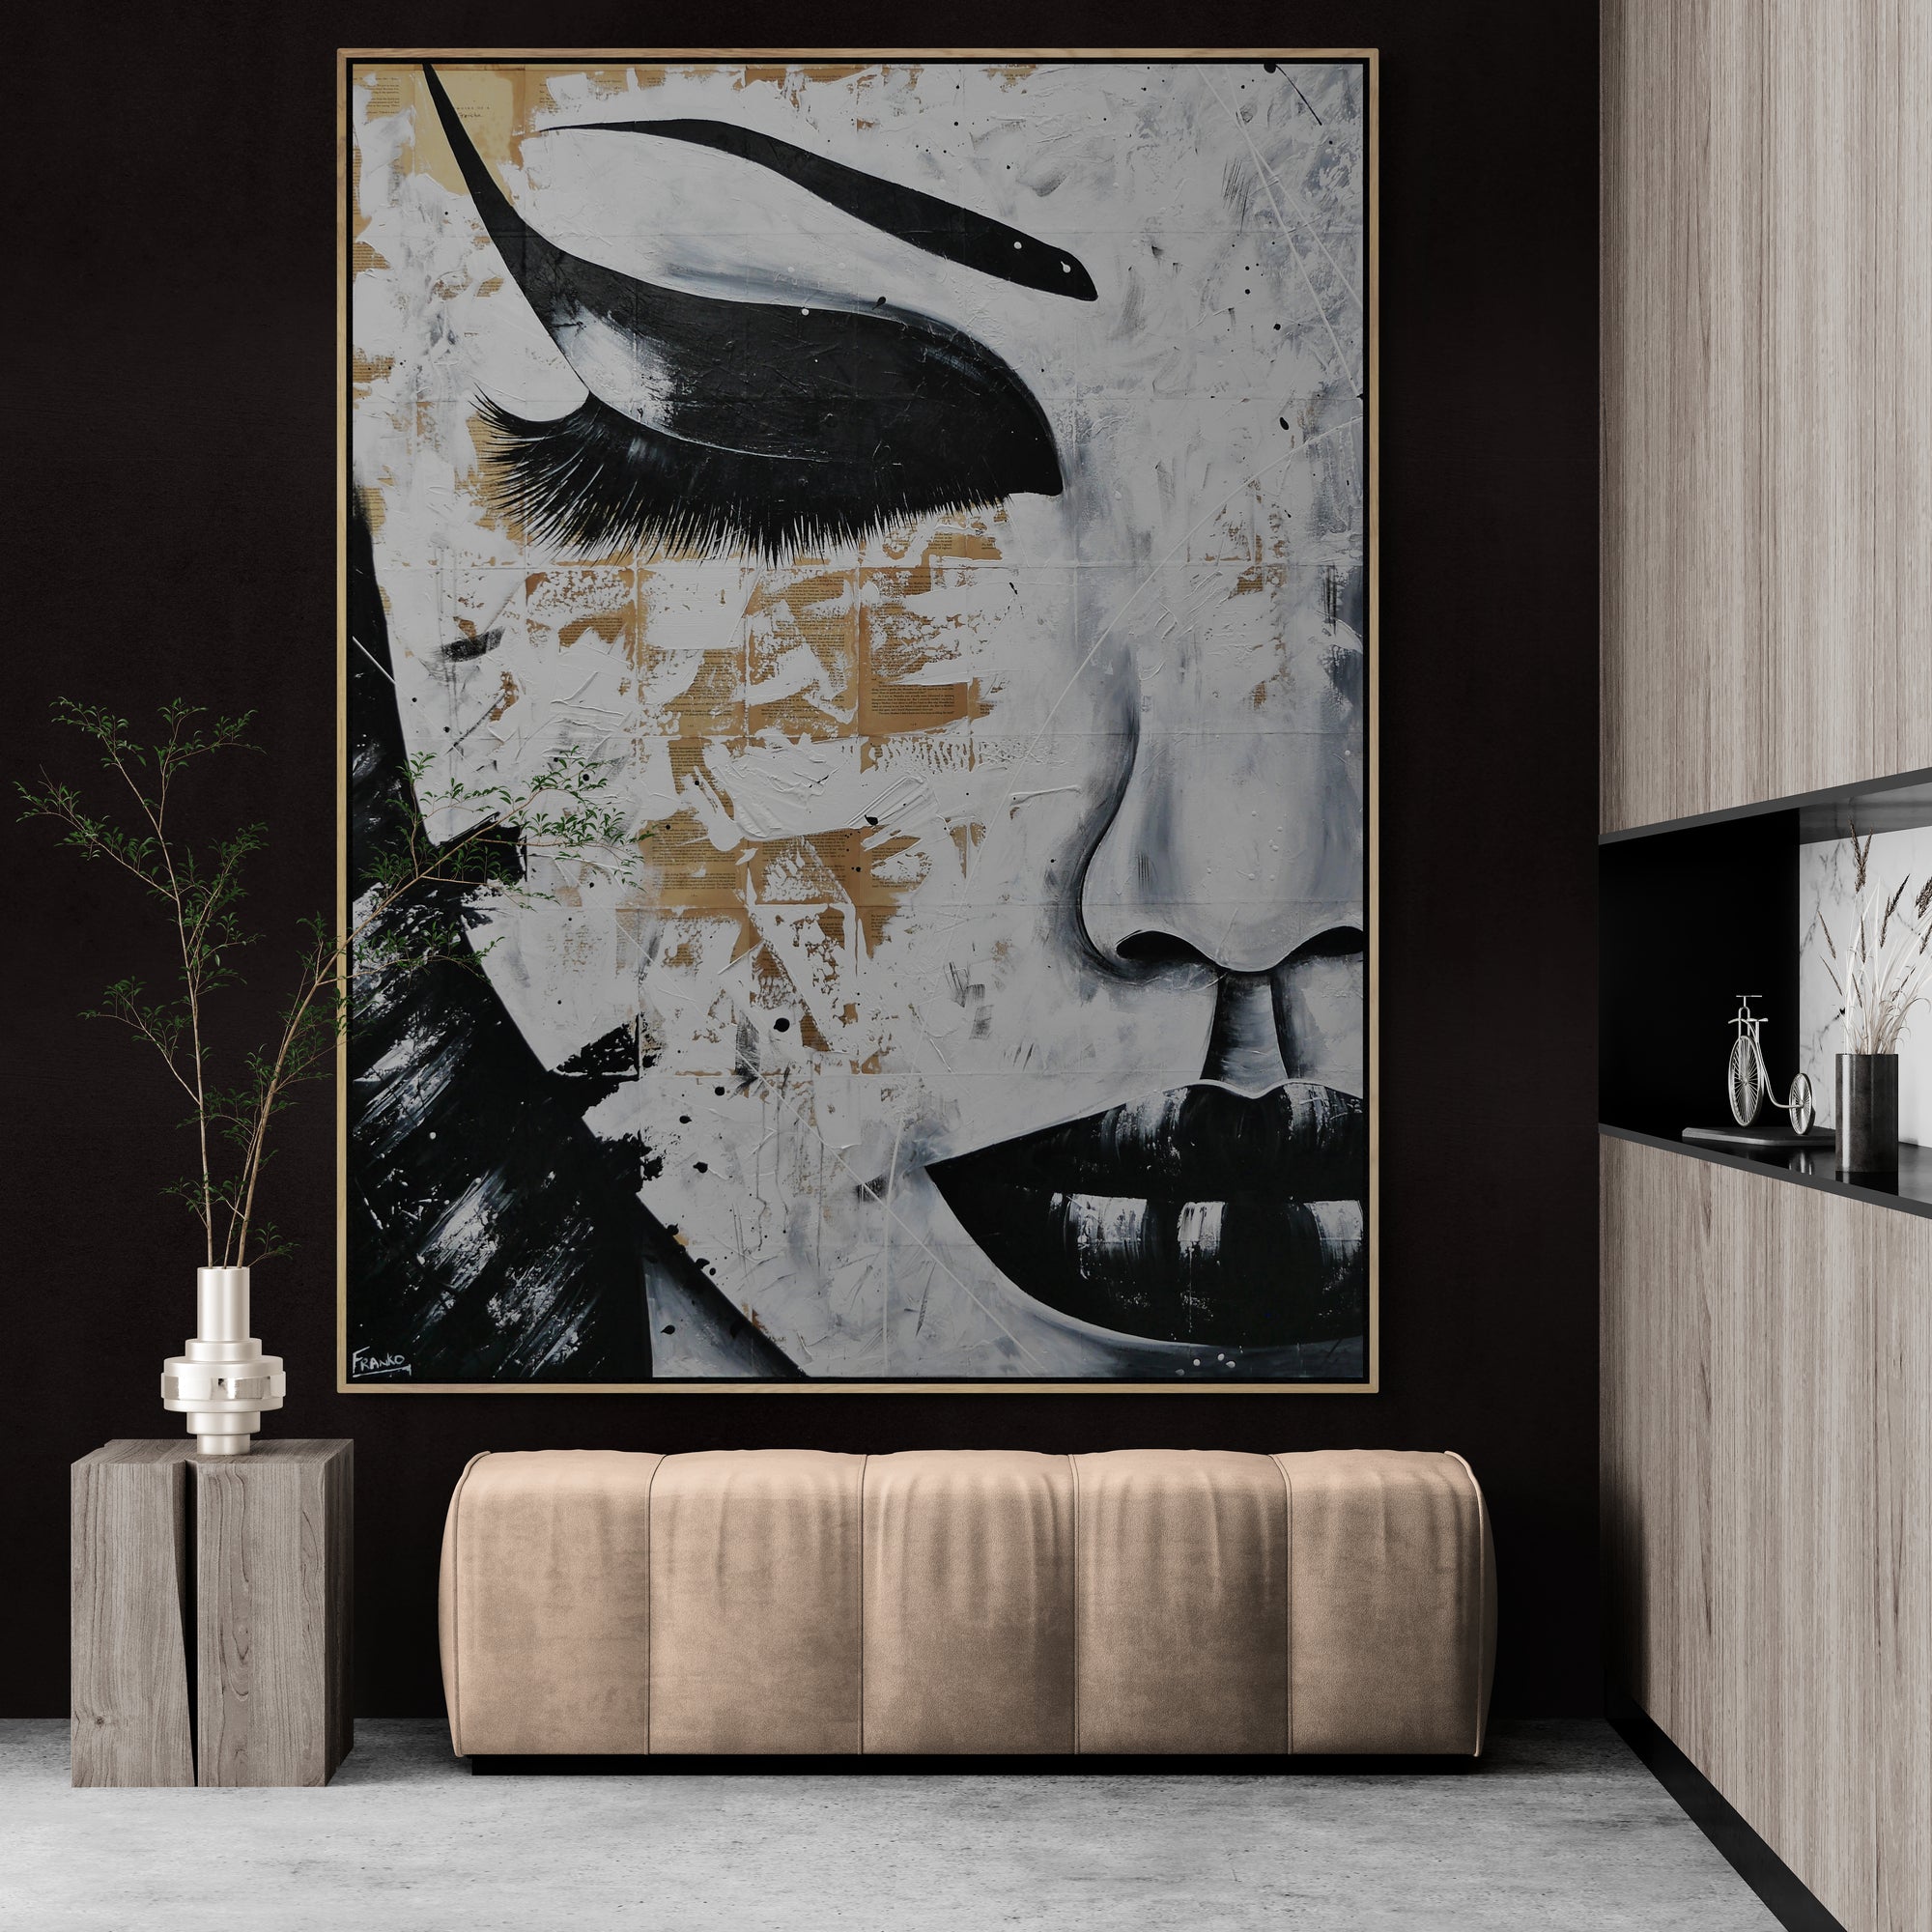 Solitude and Grace 140cm x 180cm Geisha Abstract Realism Book Club Painting (SOLD)